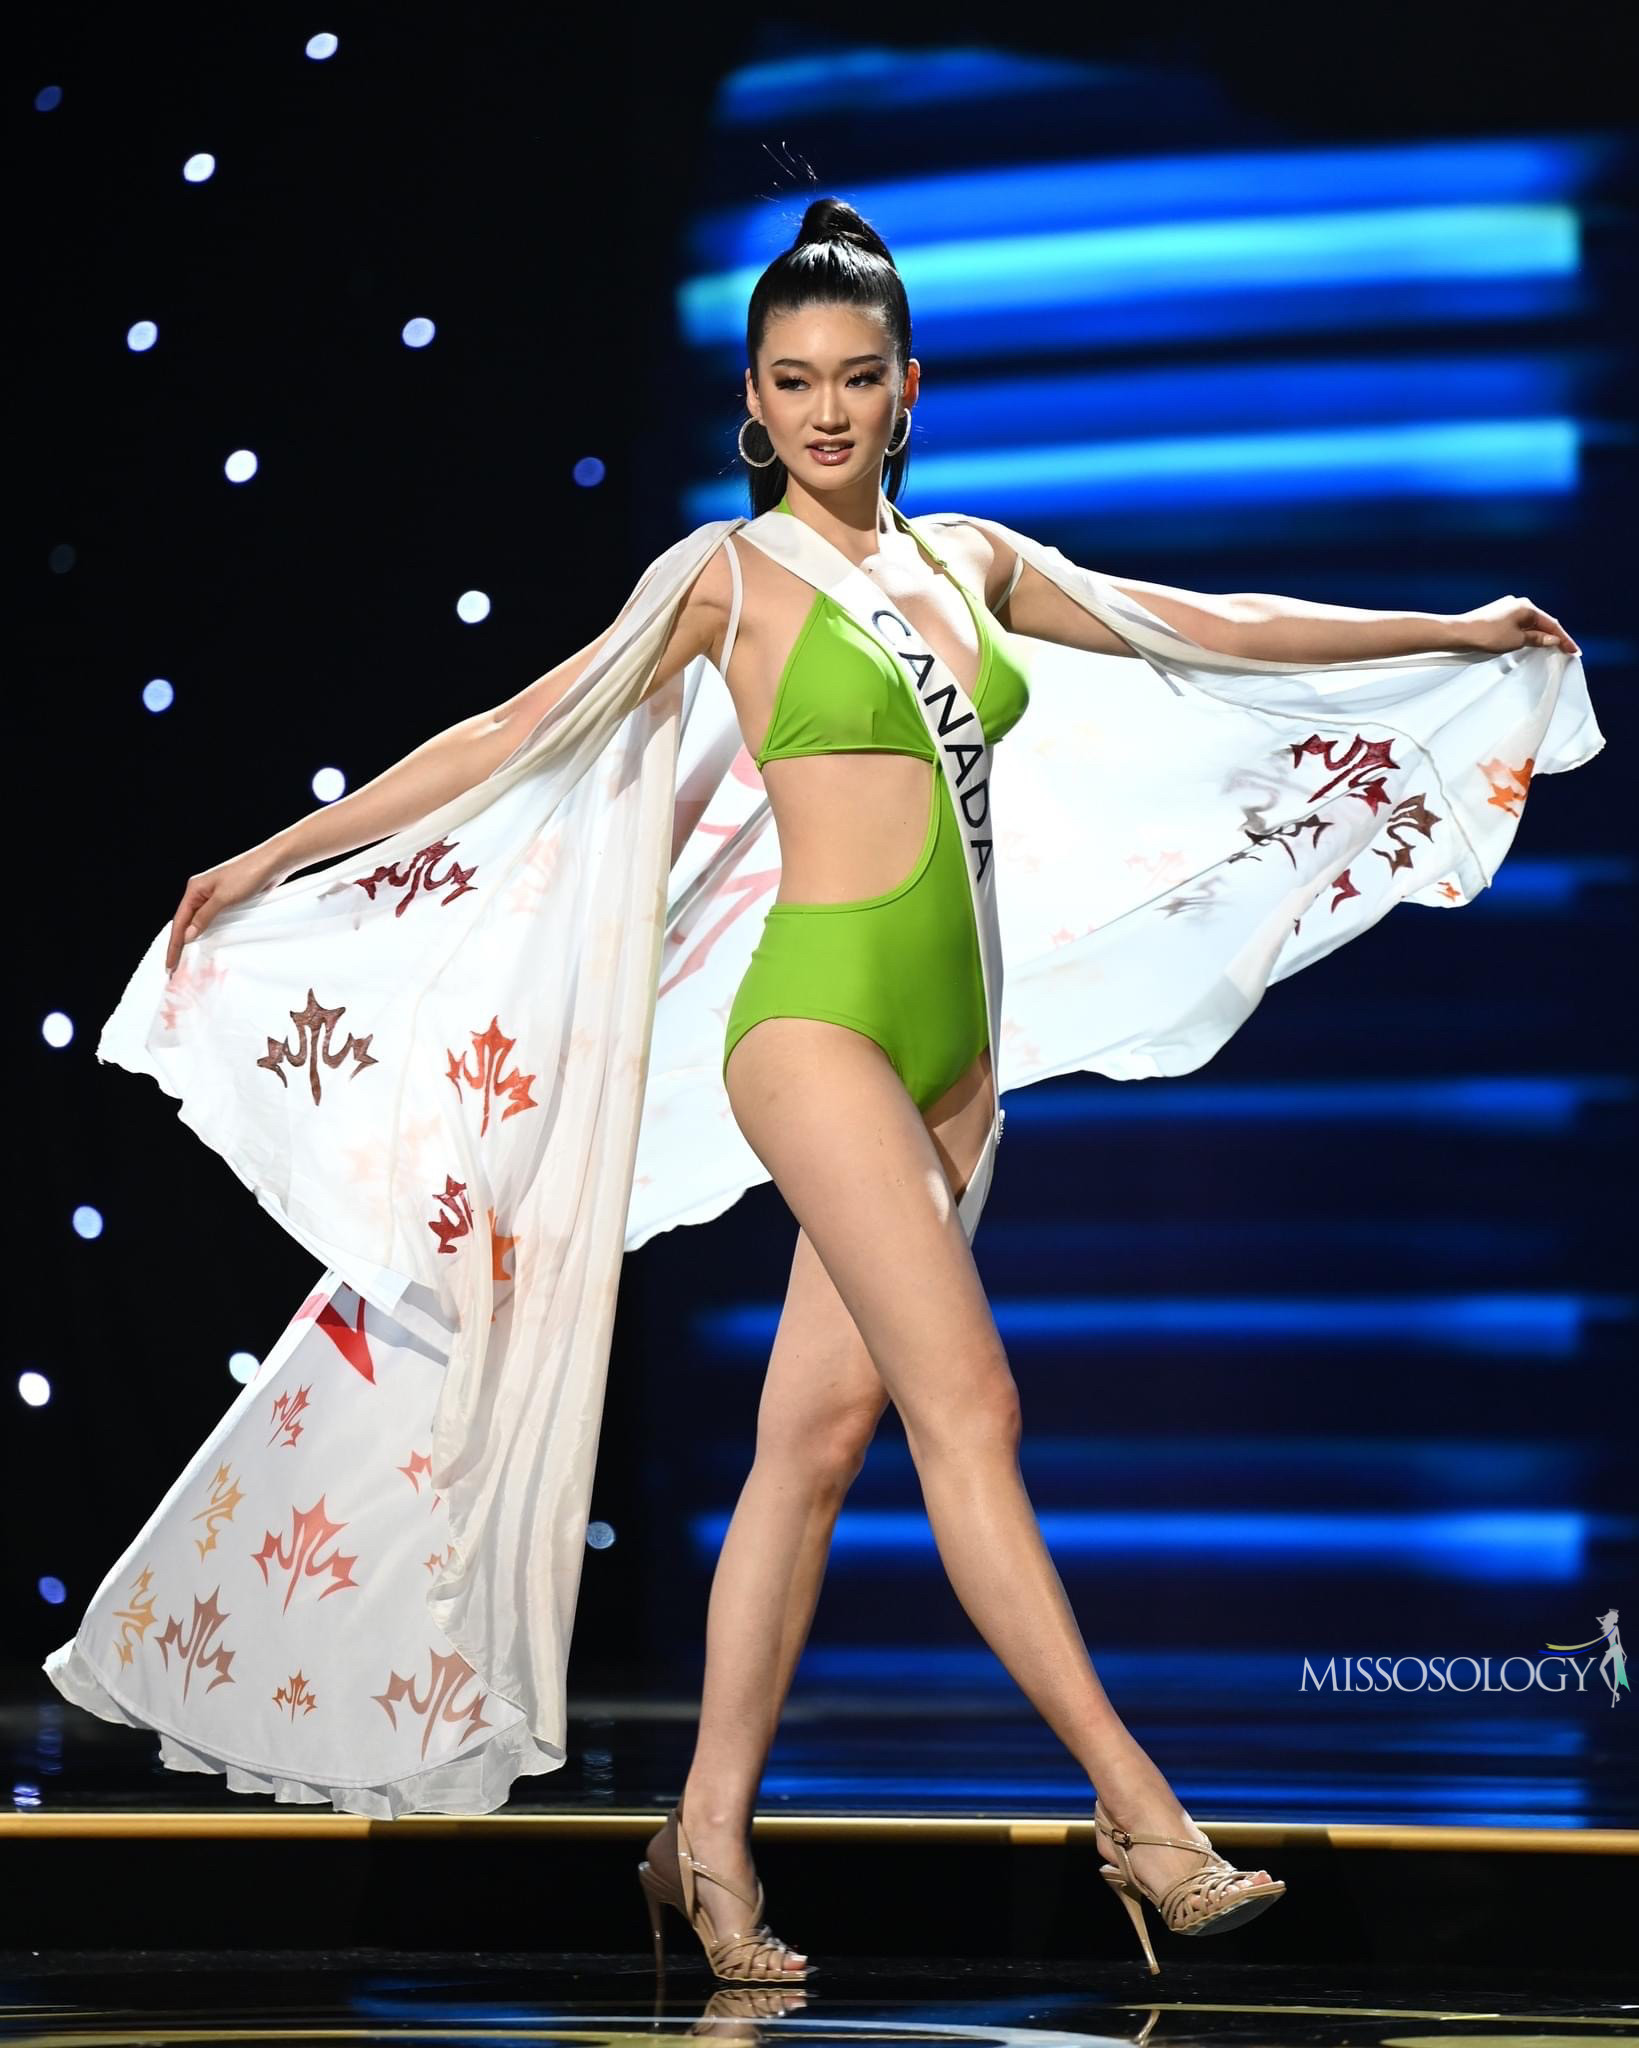 71st MISS UNIVERSE Preliminary Competition  - Página 2 HYuces4